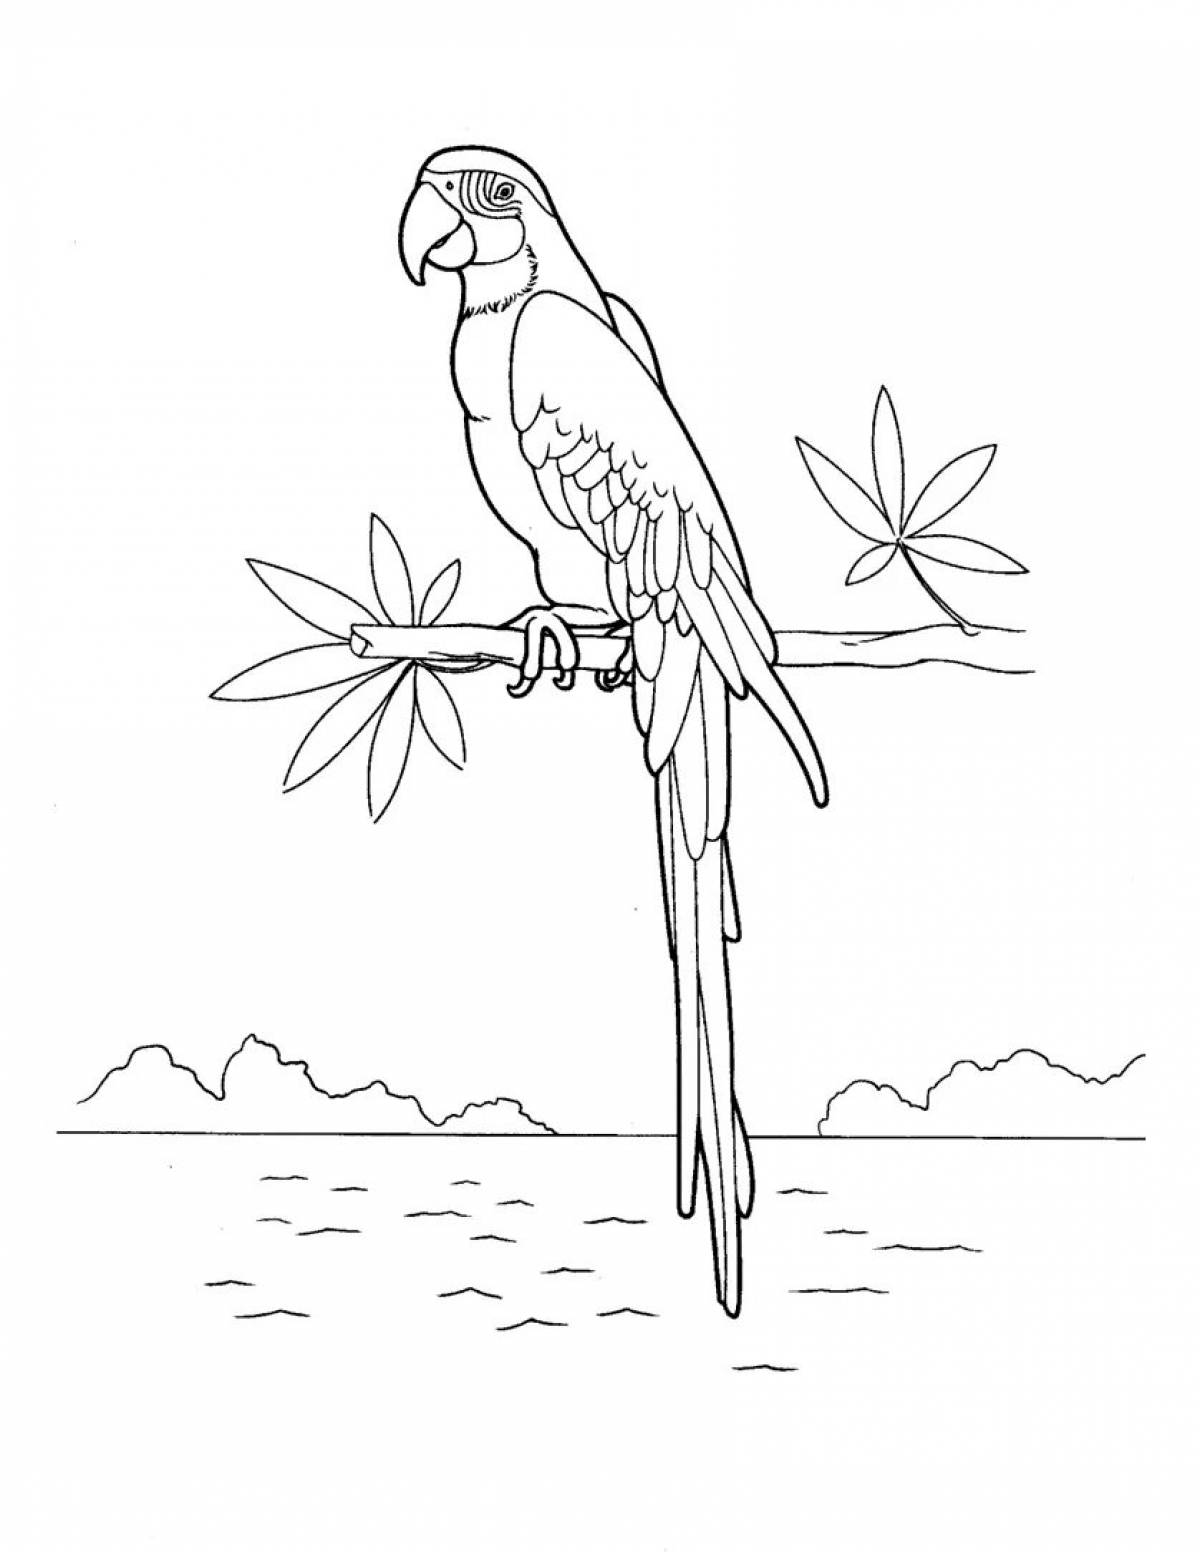 Fascinating Macaw parrot coloring book for kids